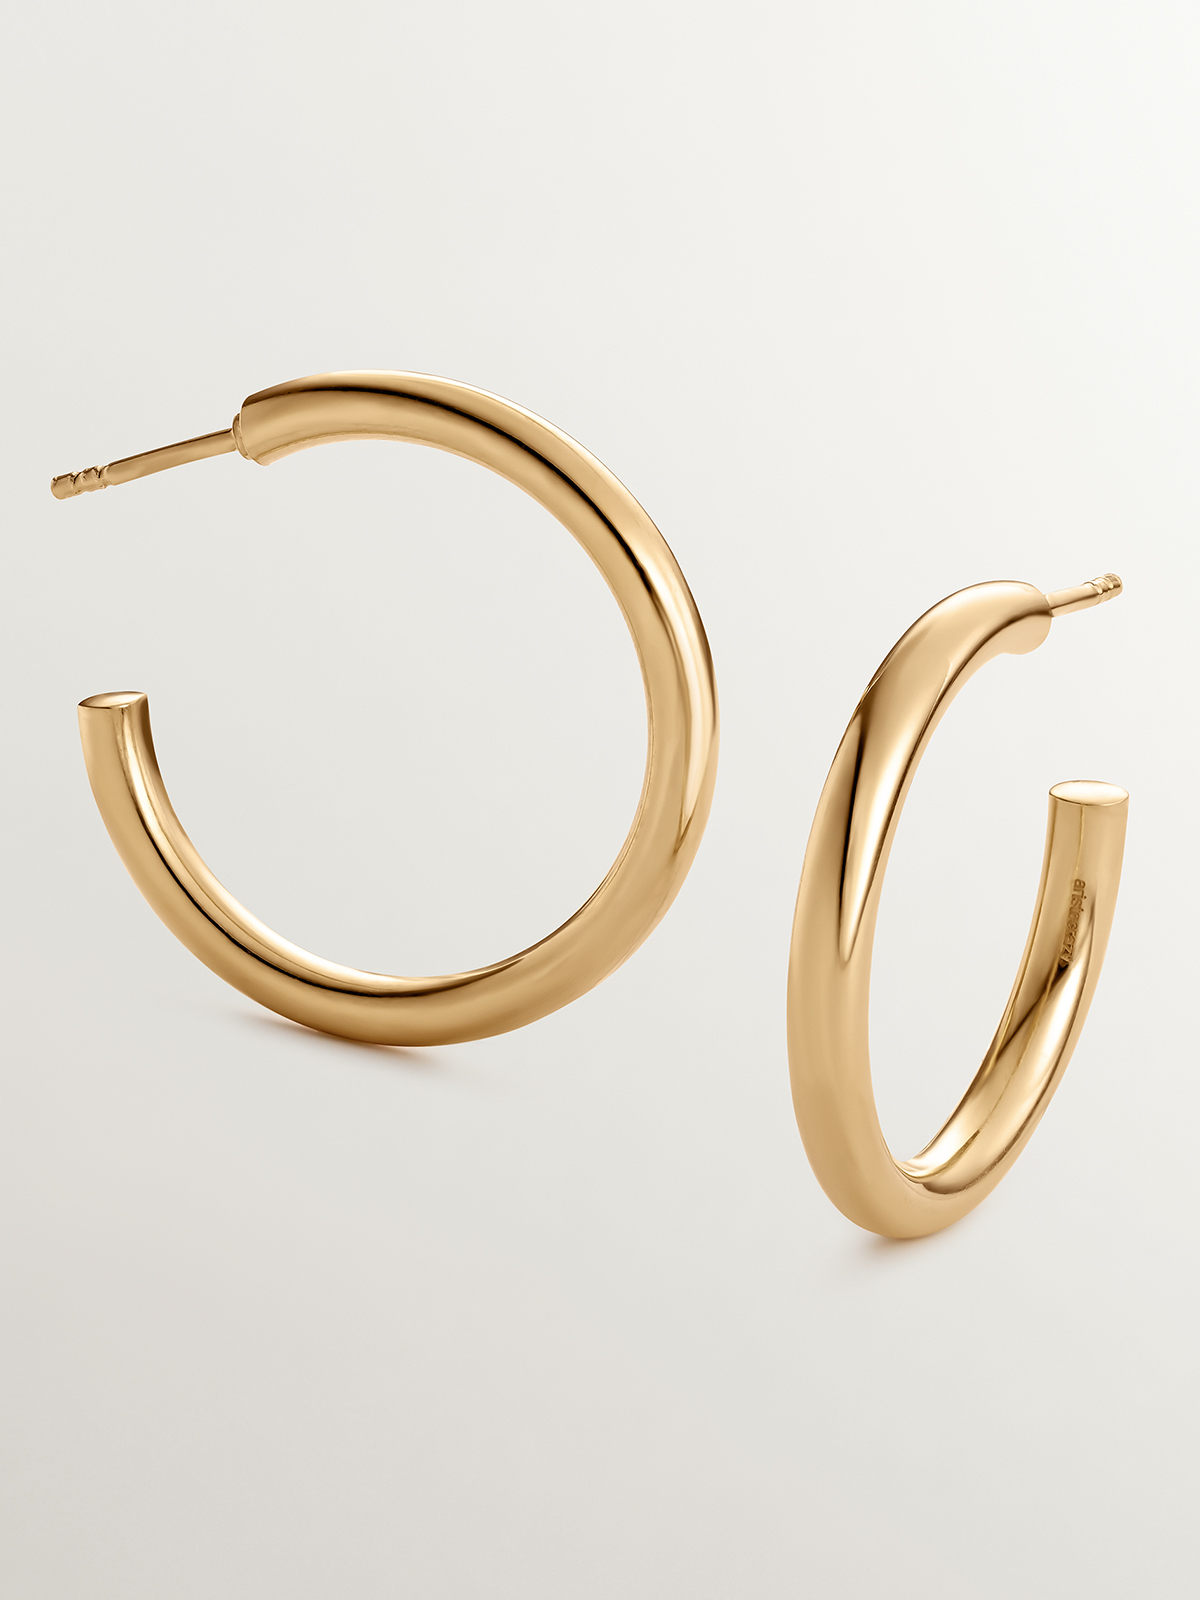 Medium-sized hoop earrings made of 925 silver, coated in 18K yellow gold.